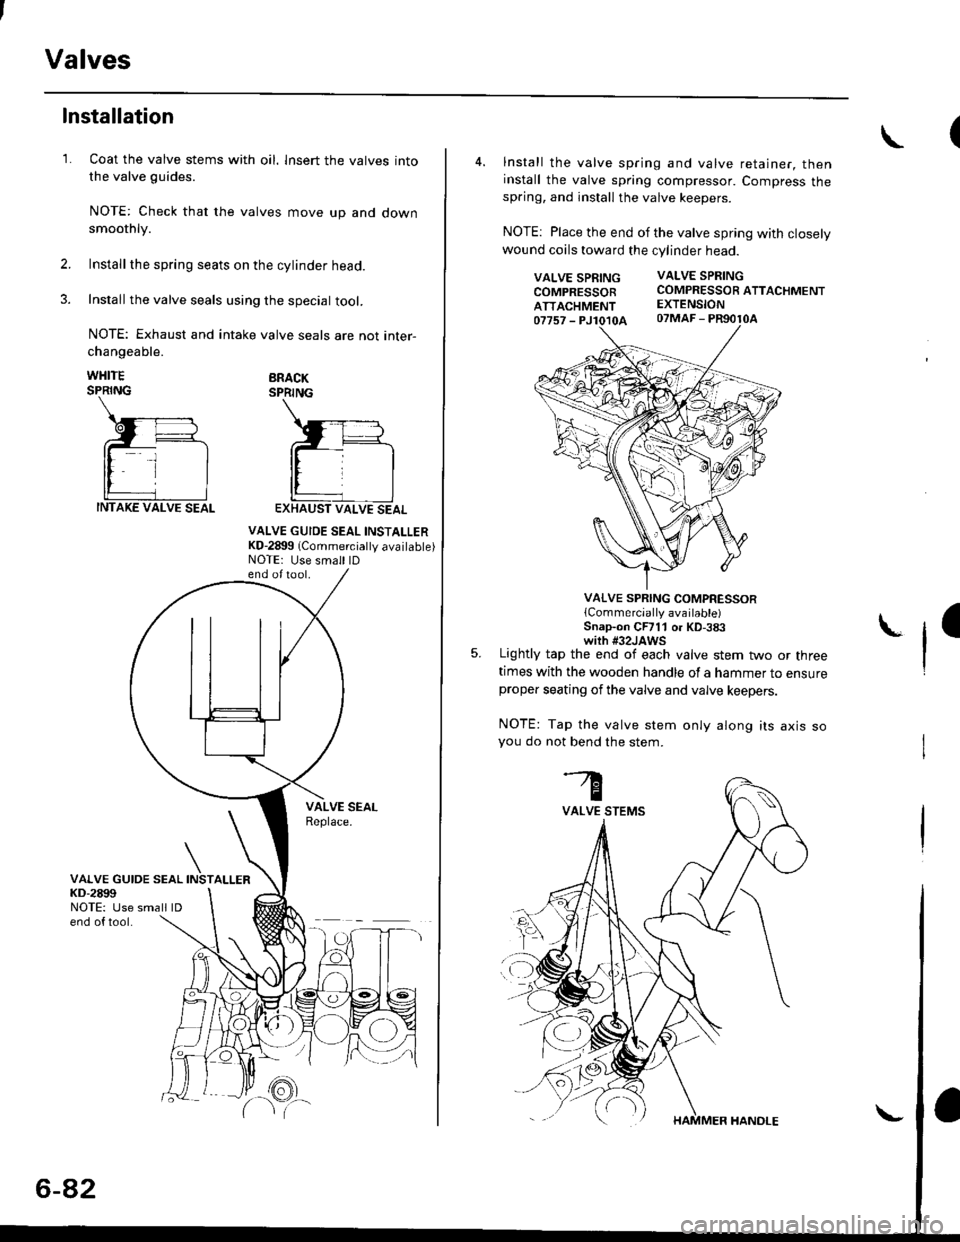 HONDA CIVIC 1997 6.G Workshop Manual Valves
1.
Installation
Coat the valve stems with oil. lnsert the valves into
the valve guides.
NOTE: Check that the valves move up and downsmoothly.
Installthe spring seats on the cylinder head.
Insta